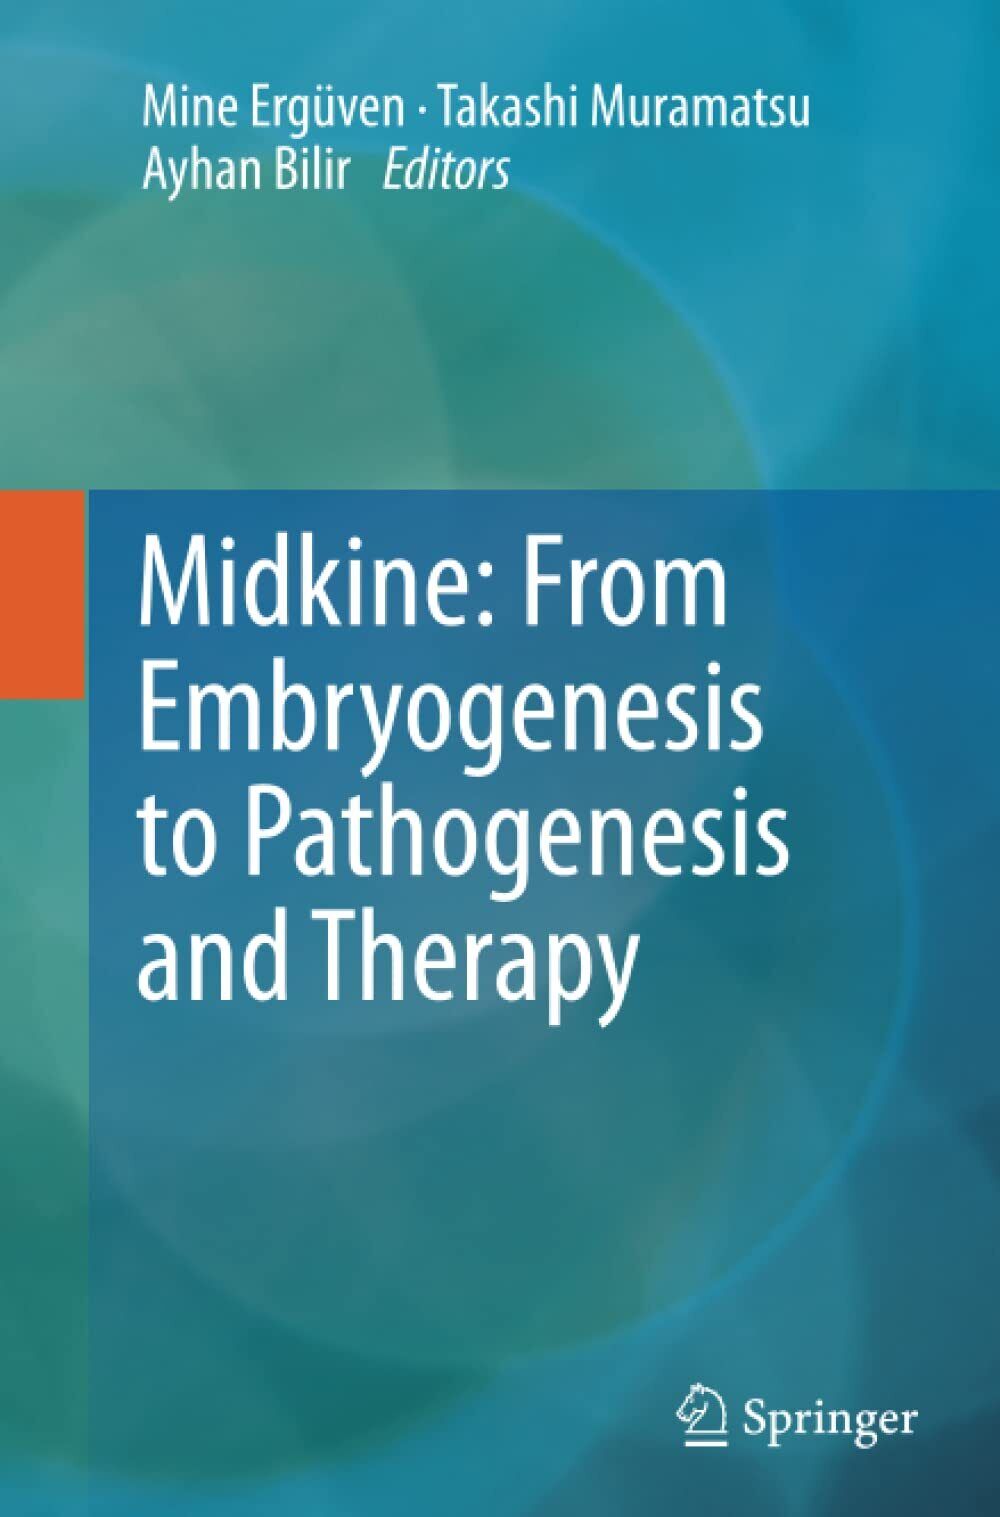 Midkine: From Embryogenesis to Pathogenesis and Therapy - Mine Erg?ven - 2014